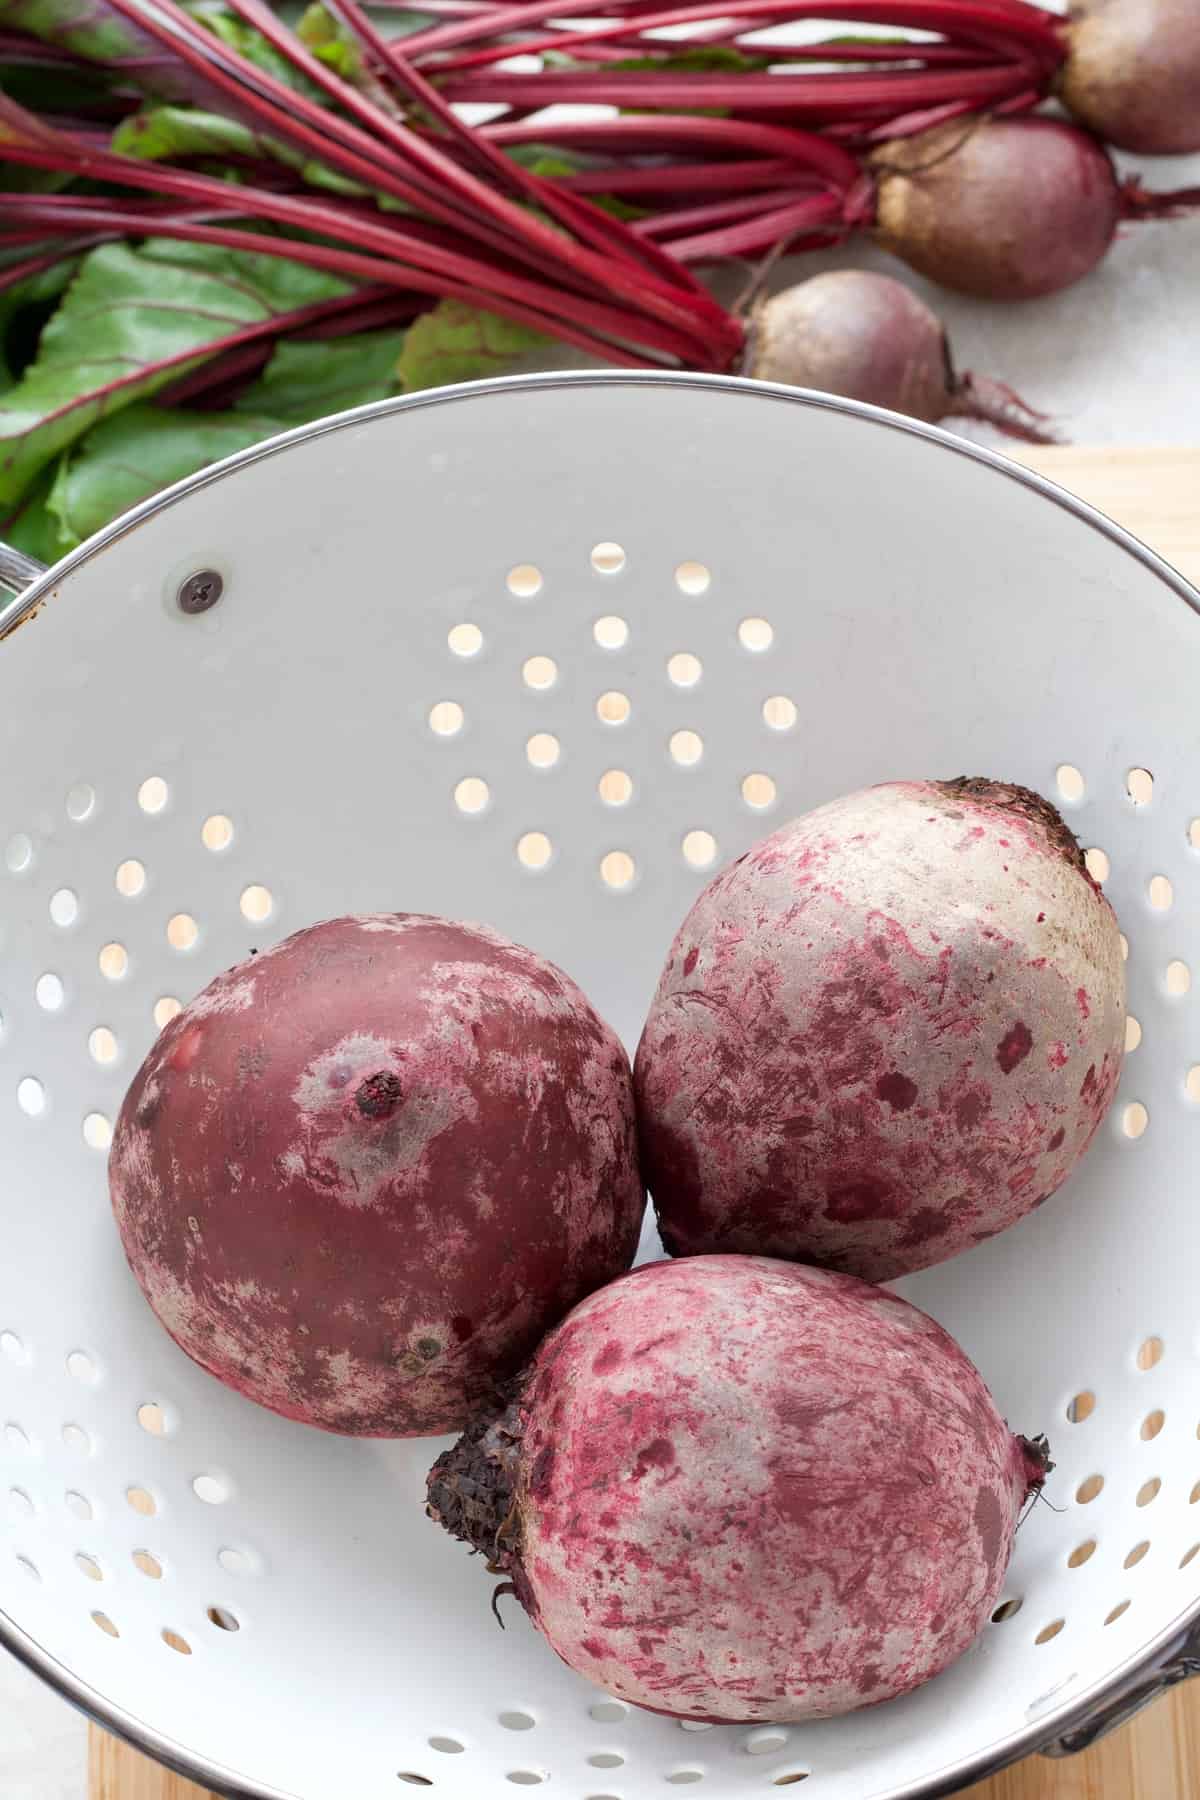 Boiled beetroot in a colander.